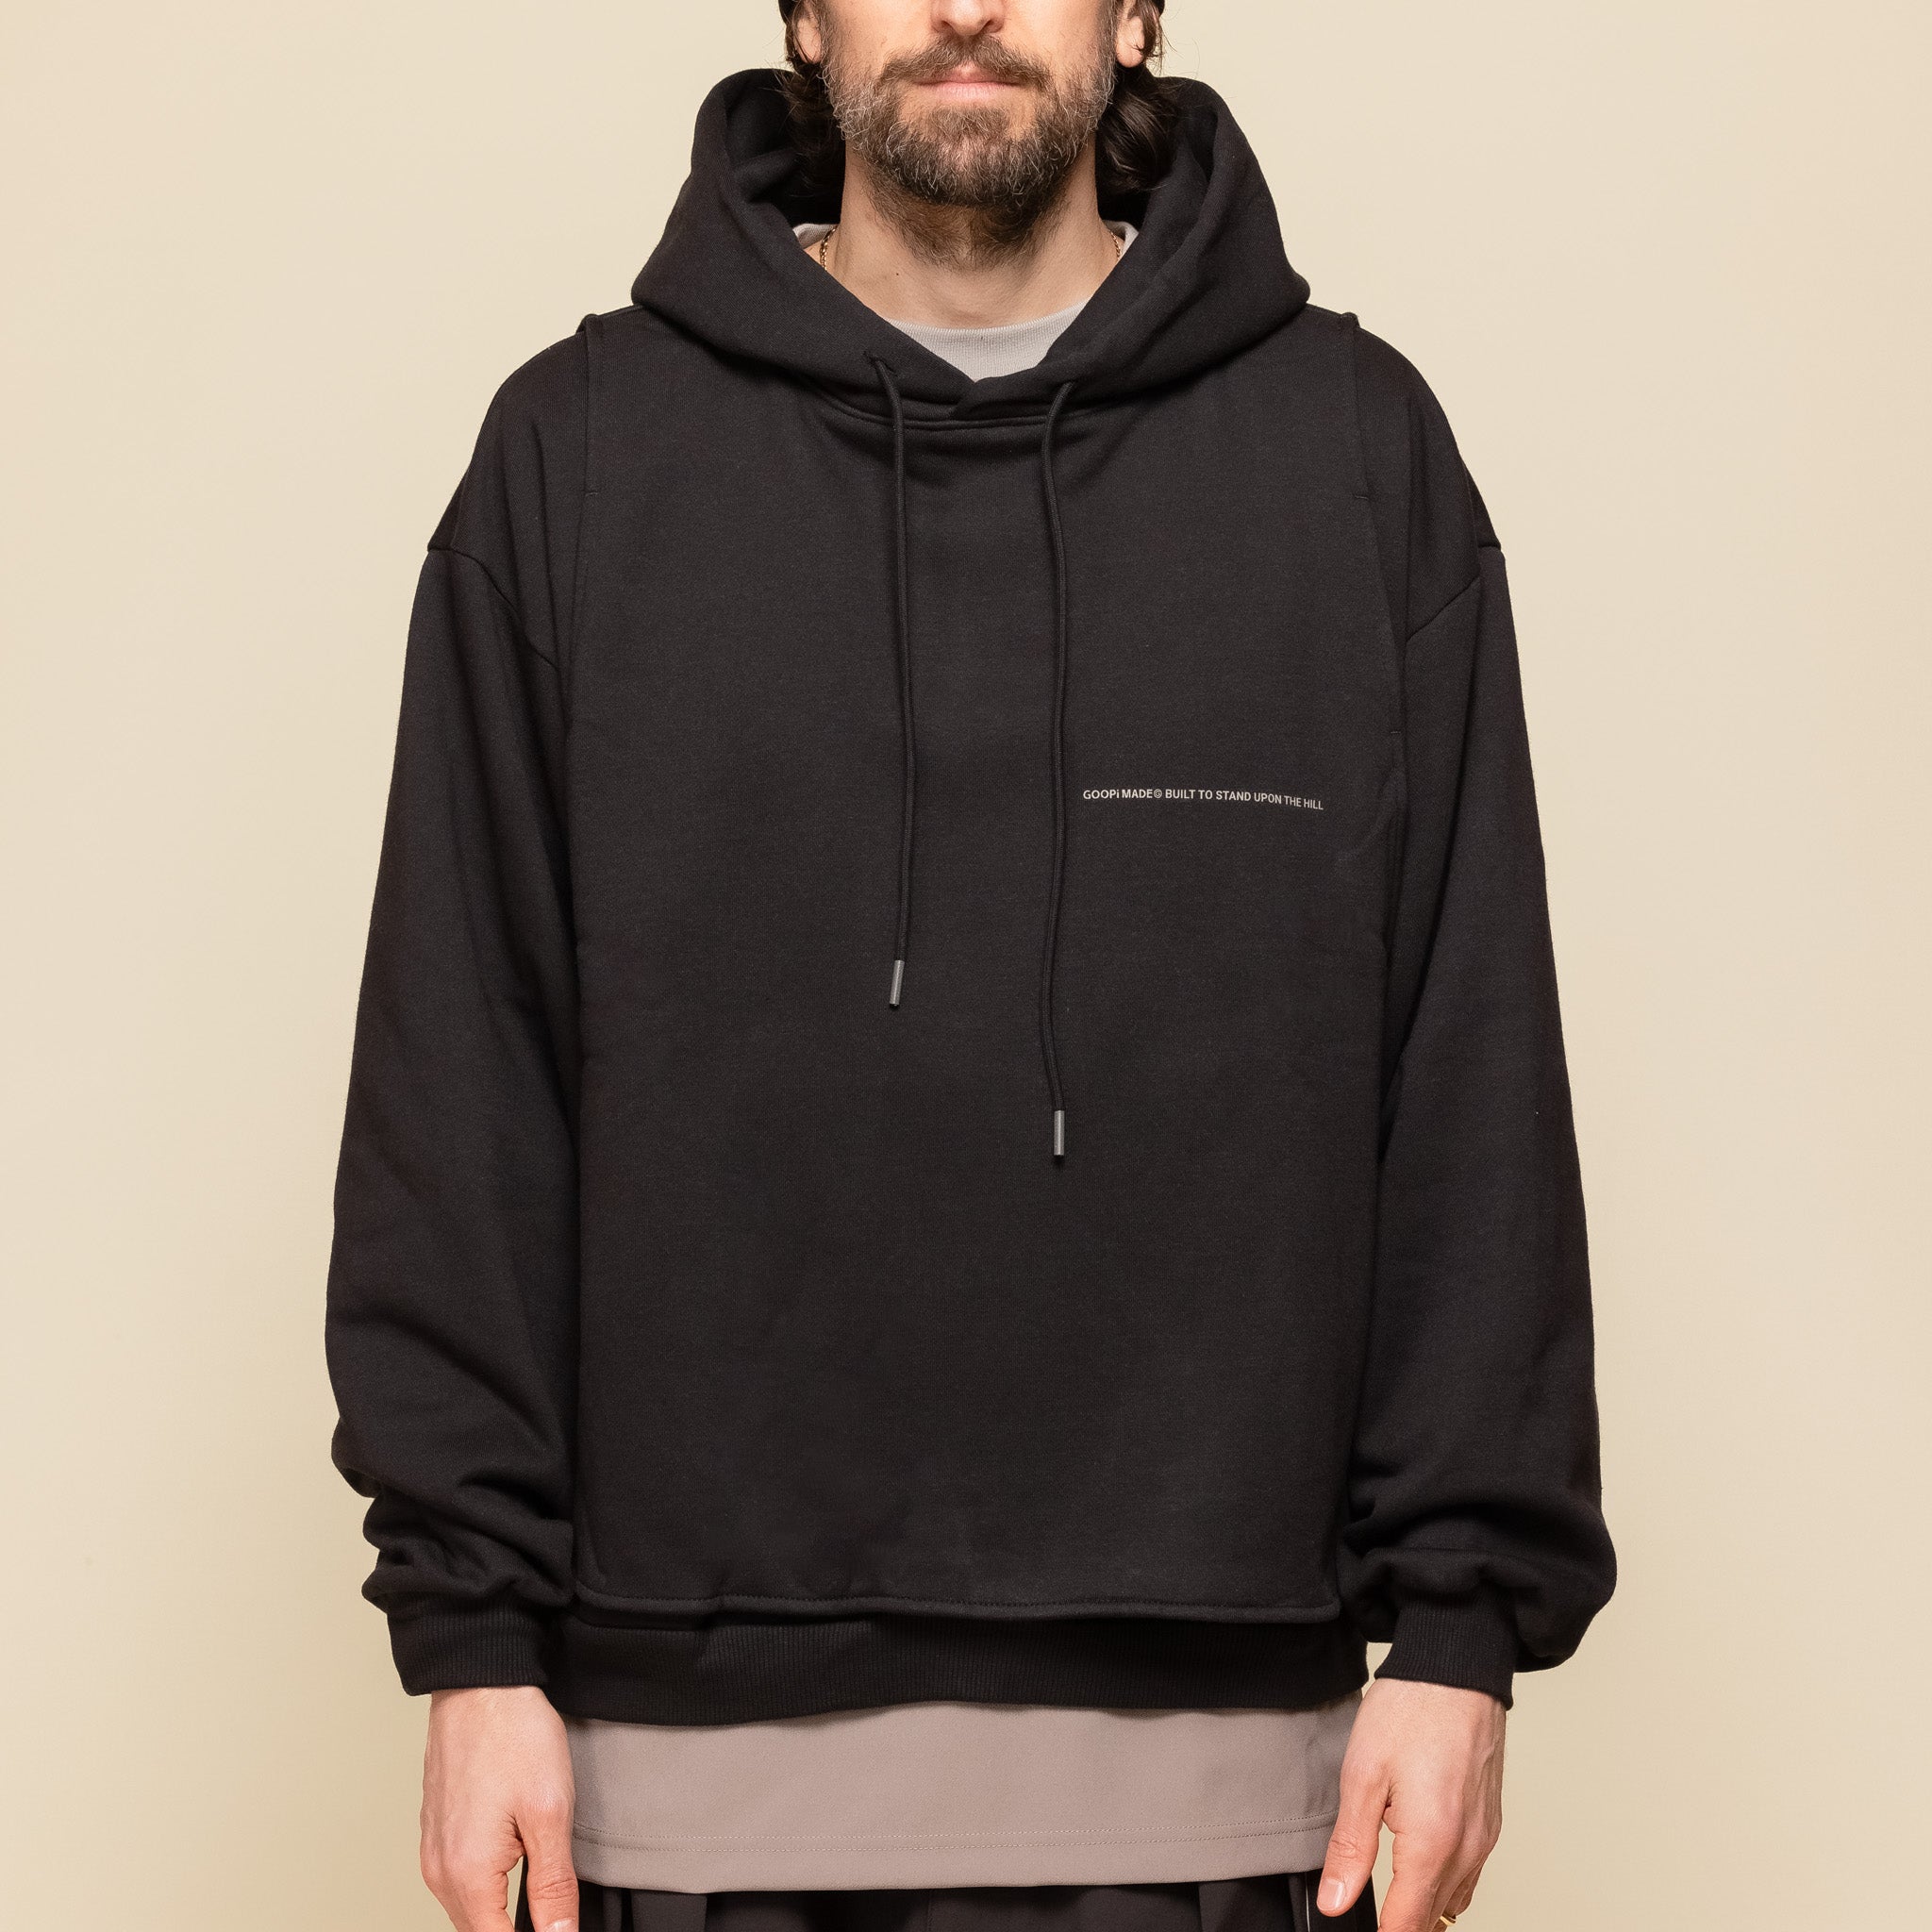 GOOPiMADE - SOFTBOX G7-H3 “Mantle” Double-Layer Hoodie - Black "goopimade stockists" "goopi pants" "goopimade pants" "goopi trousers" 